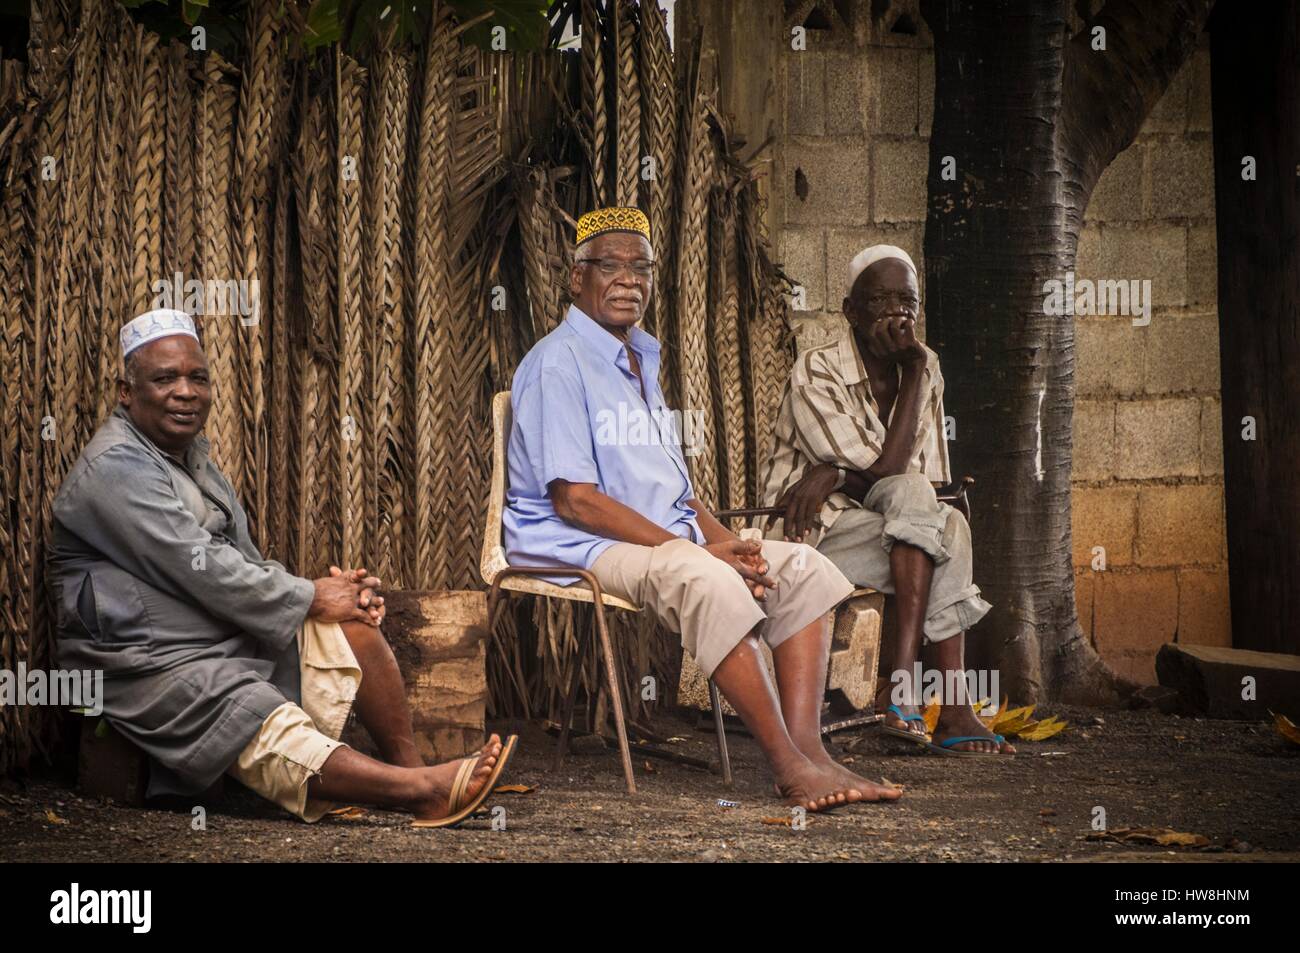 France, Mayotte island (French overseas department), Grande Terre, Mamoudzou, 3 men wearing their kofia, embroidered traditional hat from Comoros, discuss on the sidewalk just outside the mosque Stock Photo